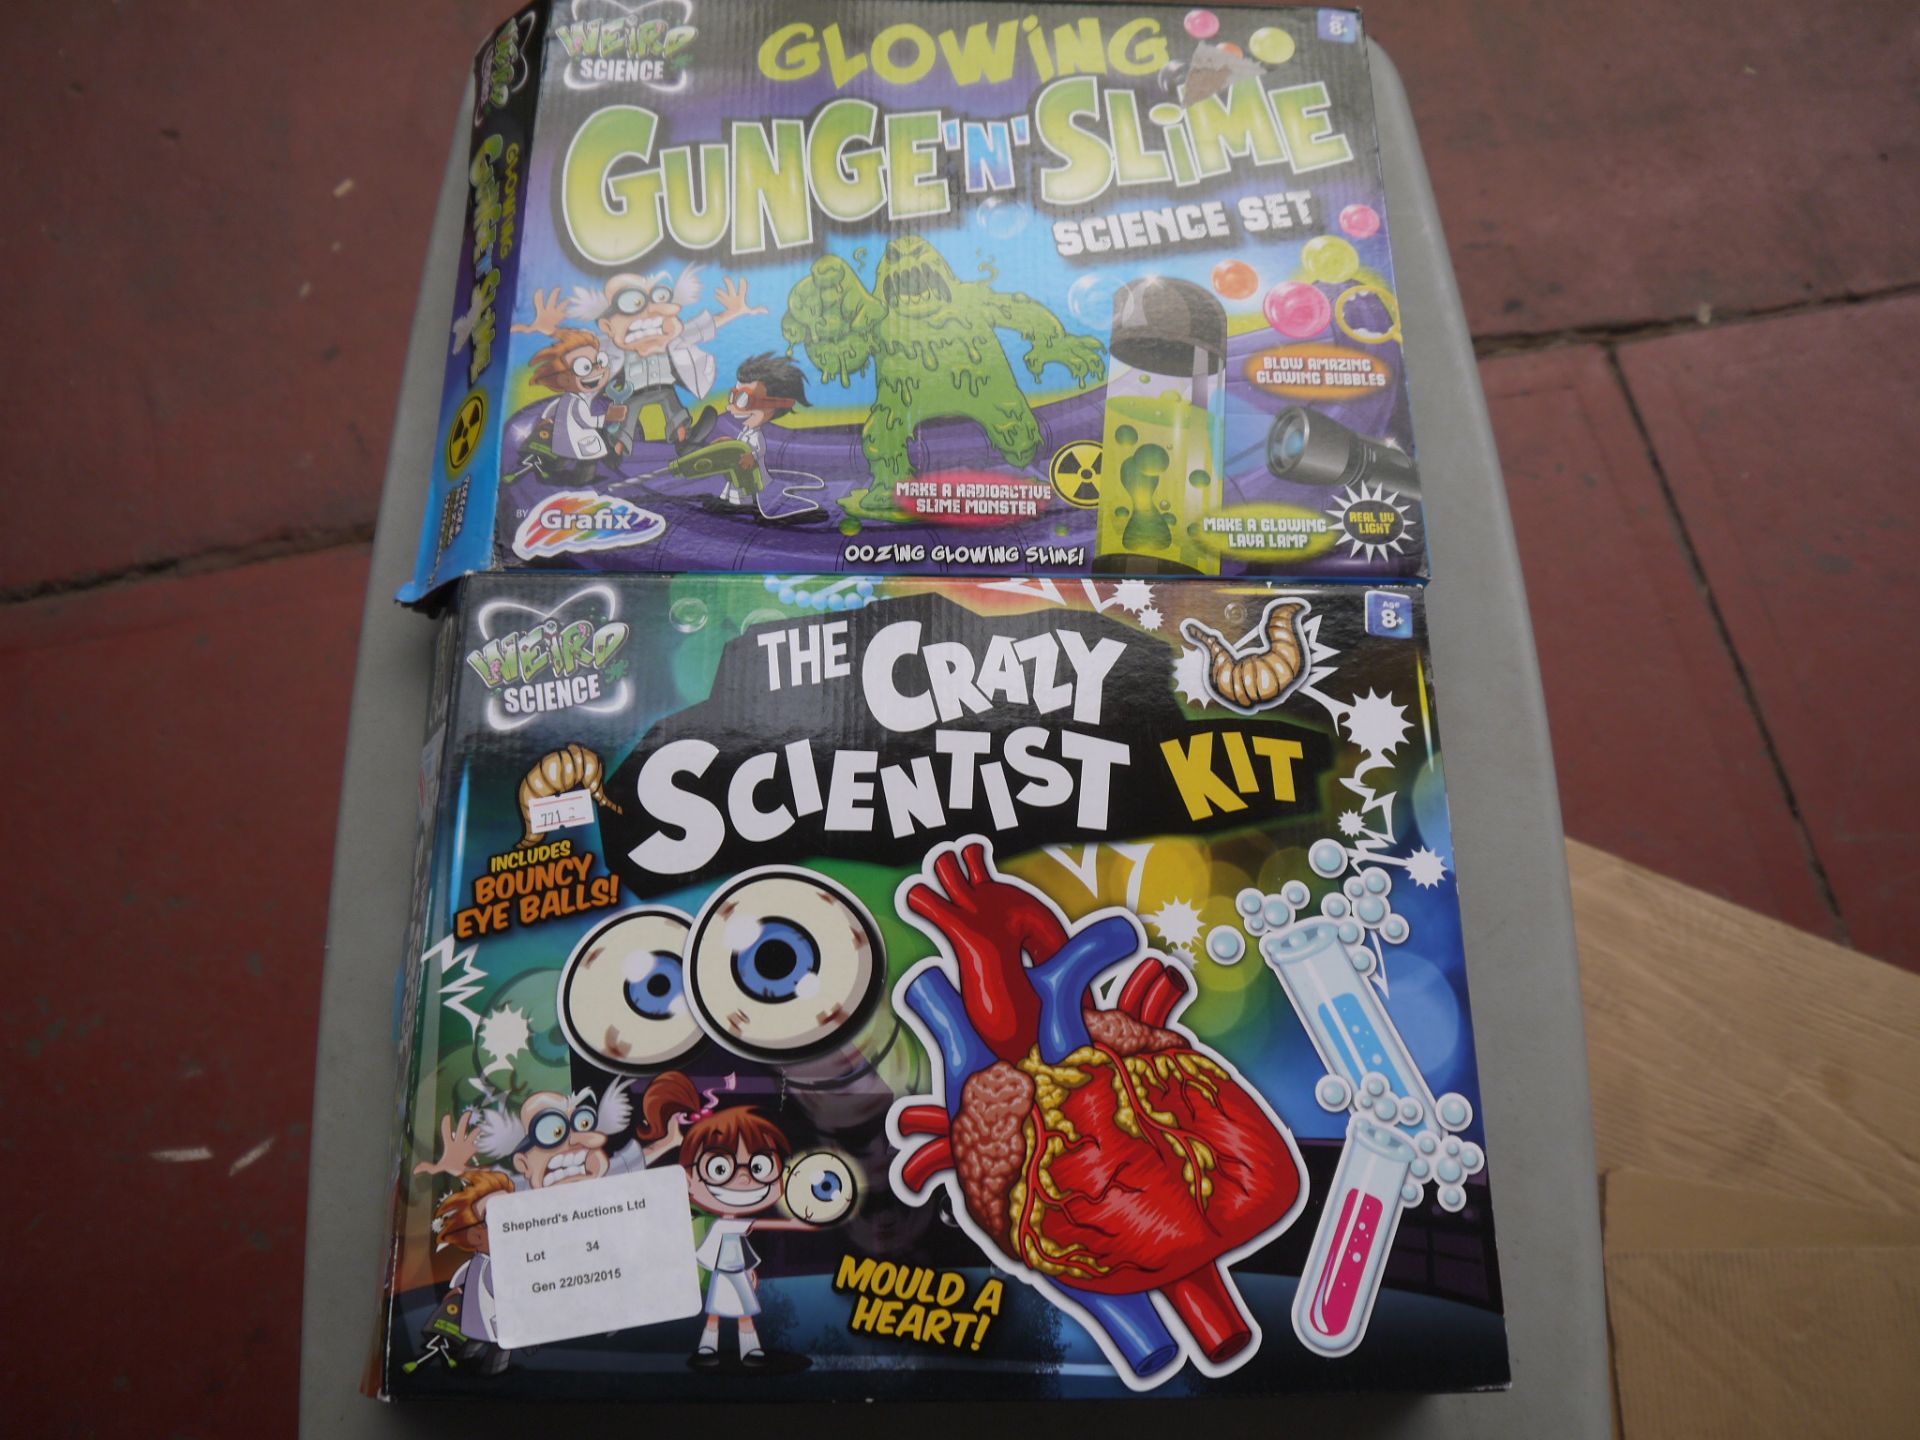 1x Weird Science, the crazy scientist kit. And 1x Glowing Gunge and Slim Kit. Boxed.